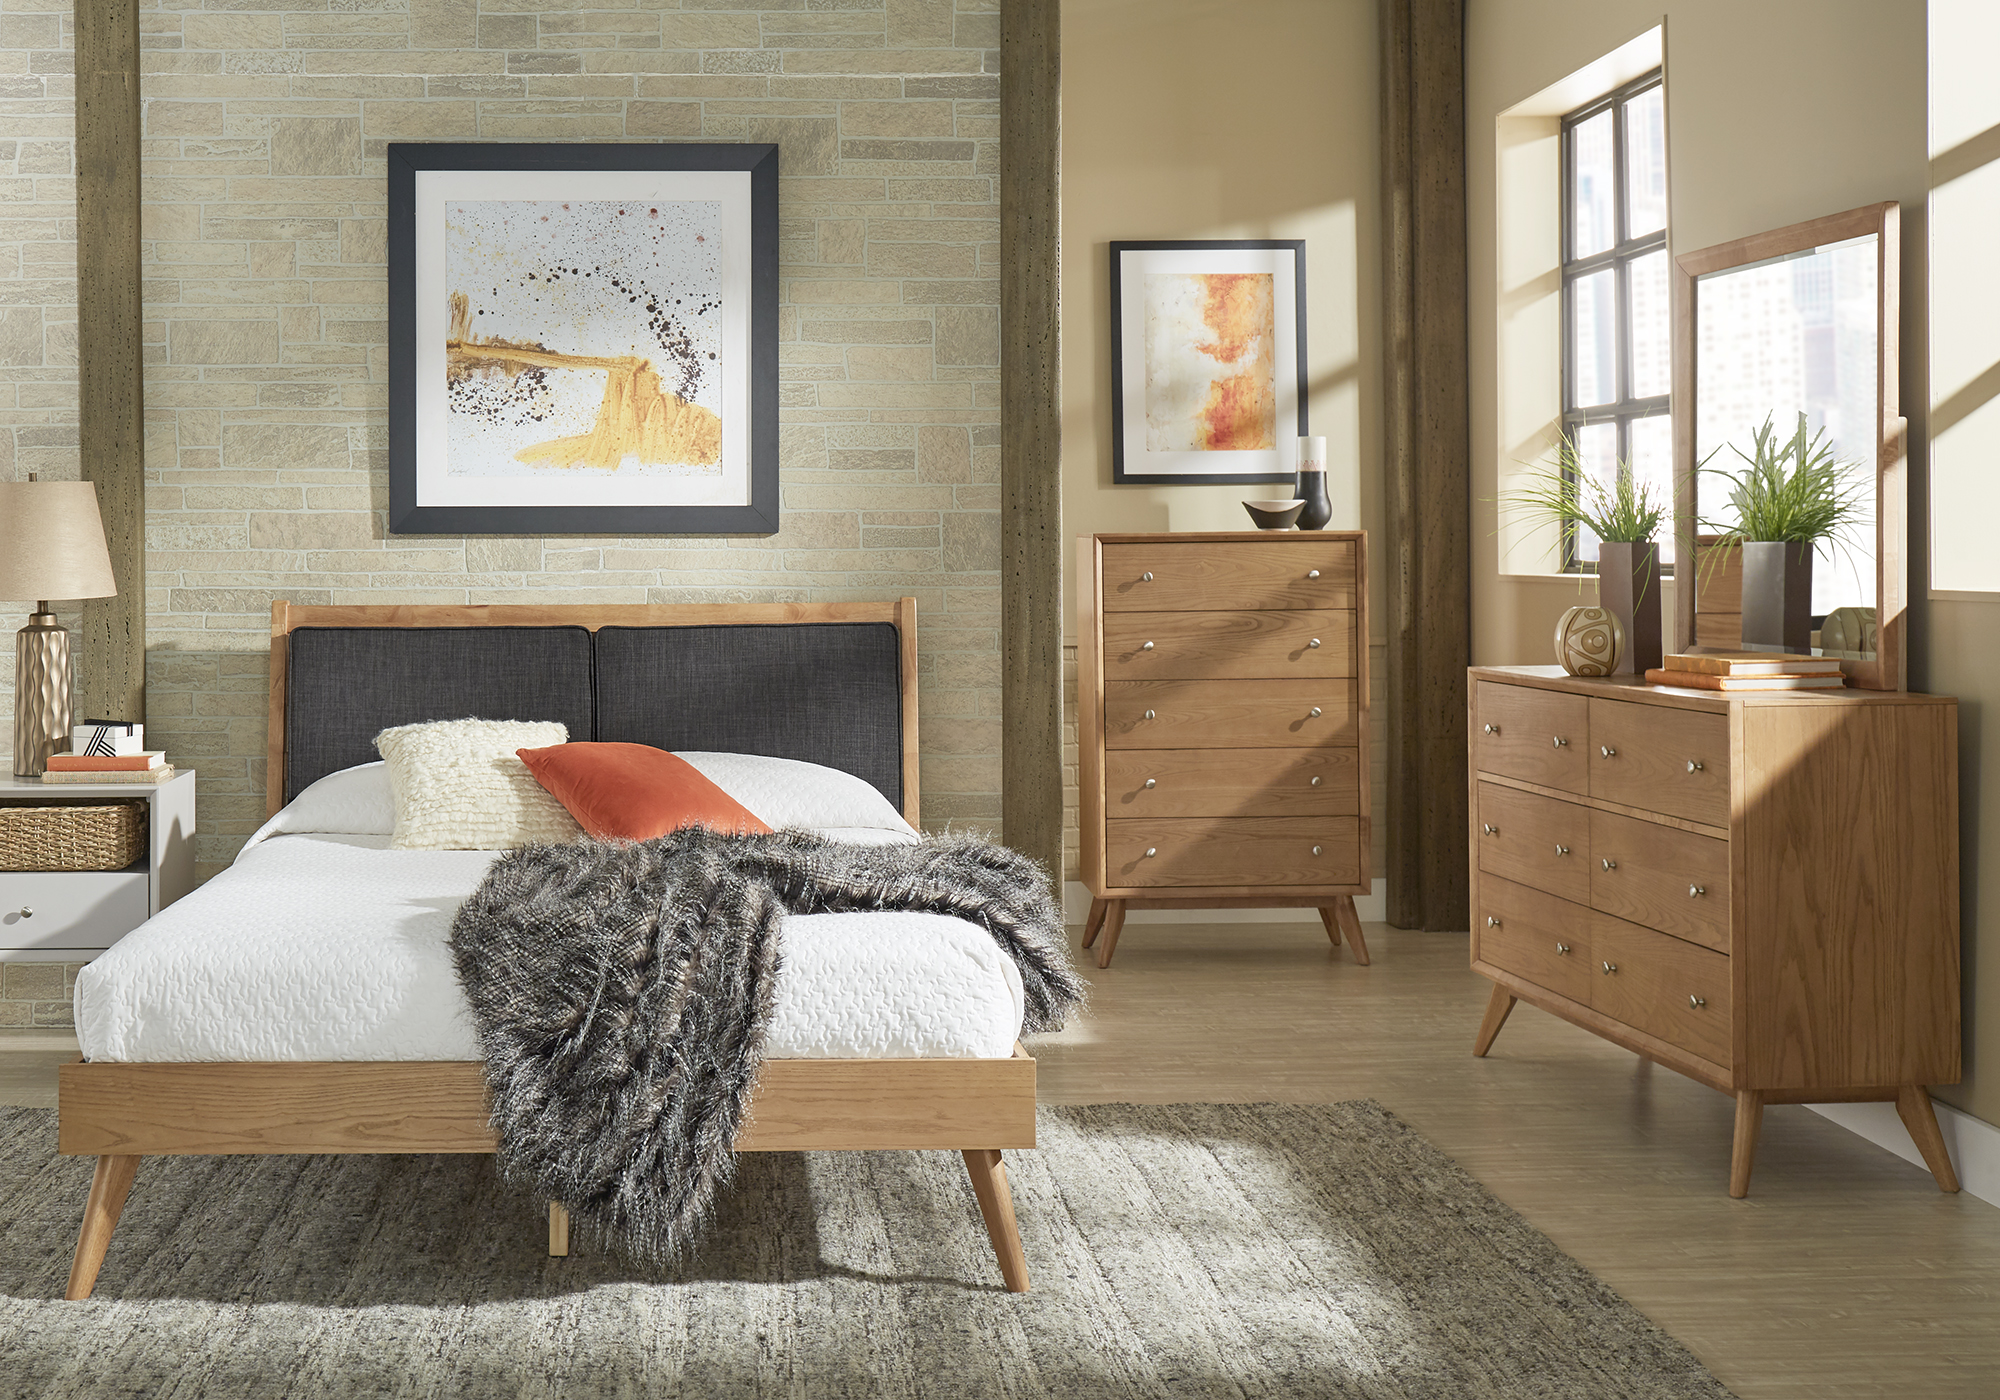 Natural wood is another technique we suggest in our guide on how to make your guests feel right at home. This mid-century modern bedroom pictured here has a natural wood finish platform bed, a natural wood finish dresser, and a matching natural wood finish chest.